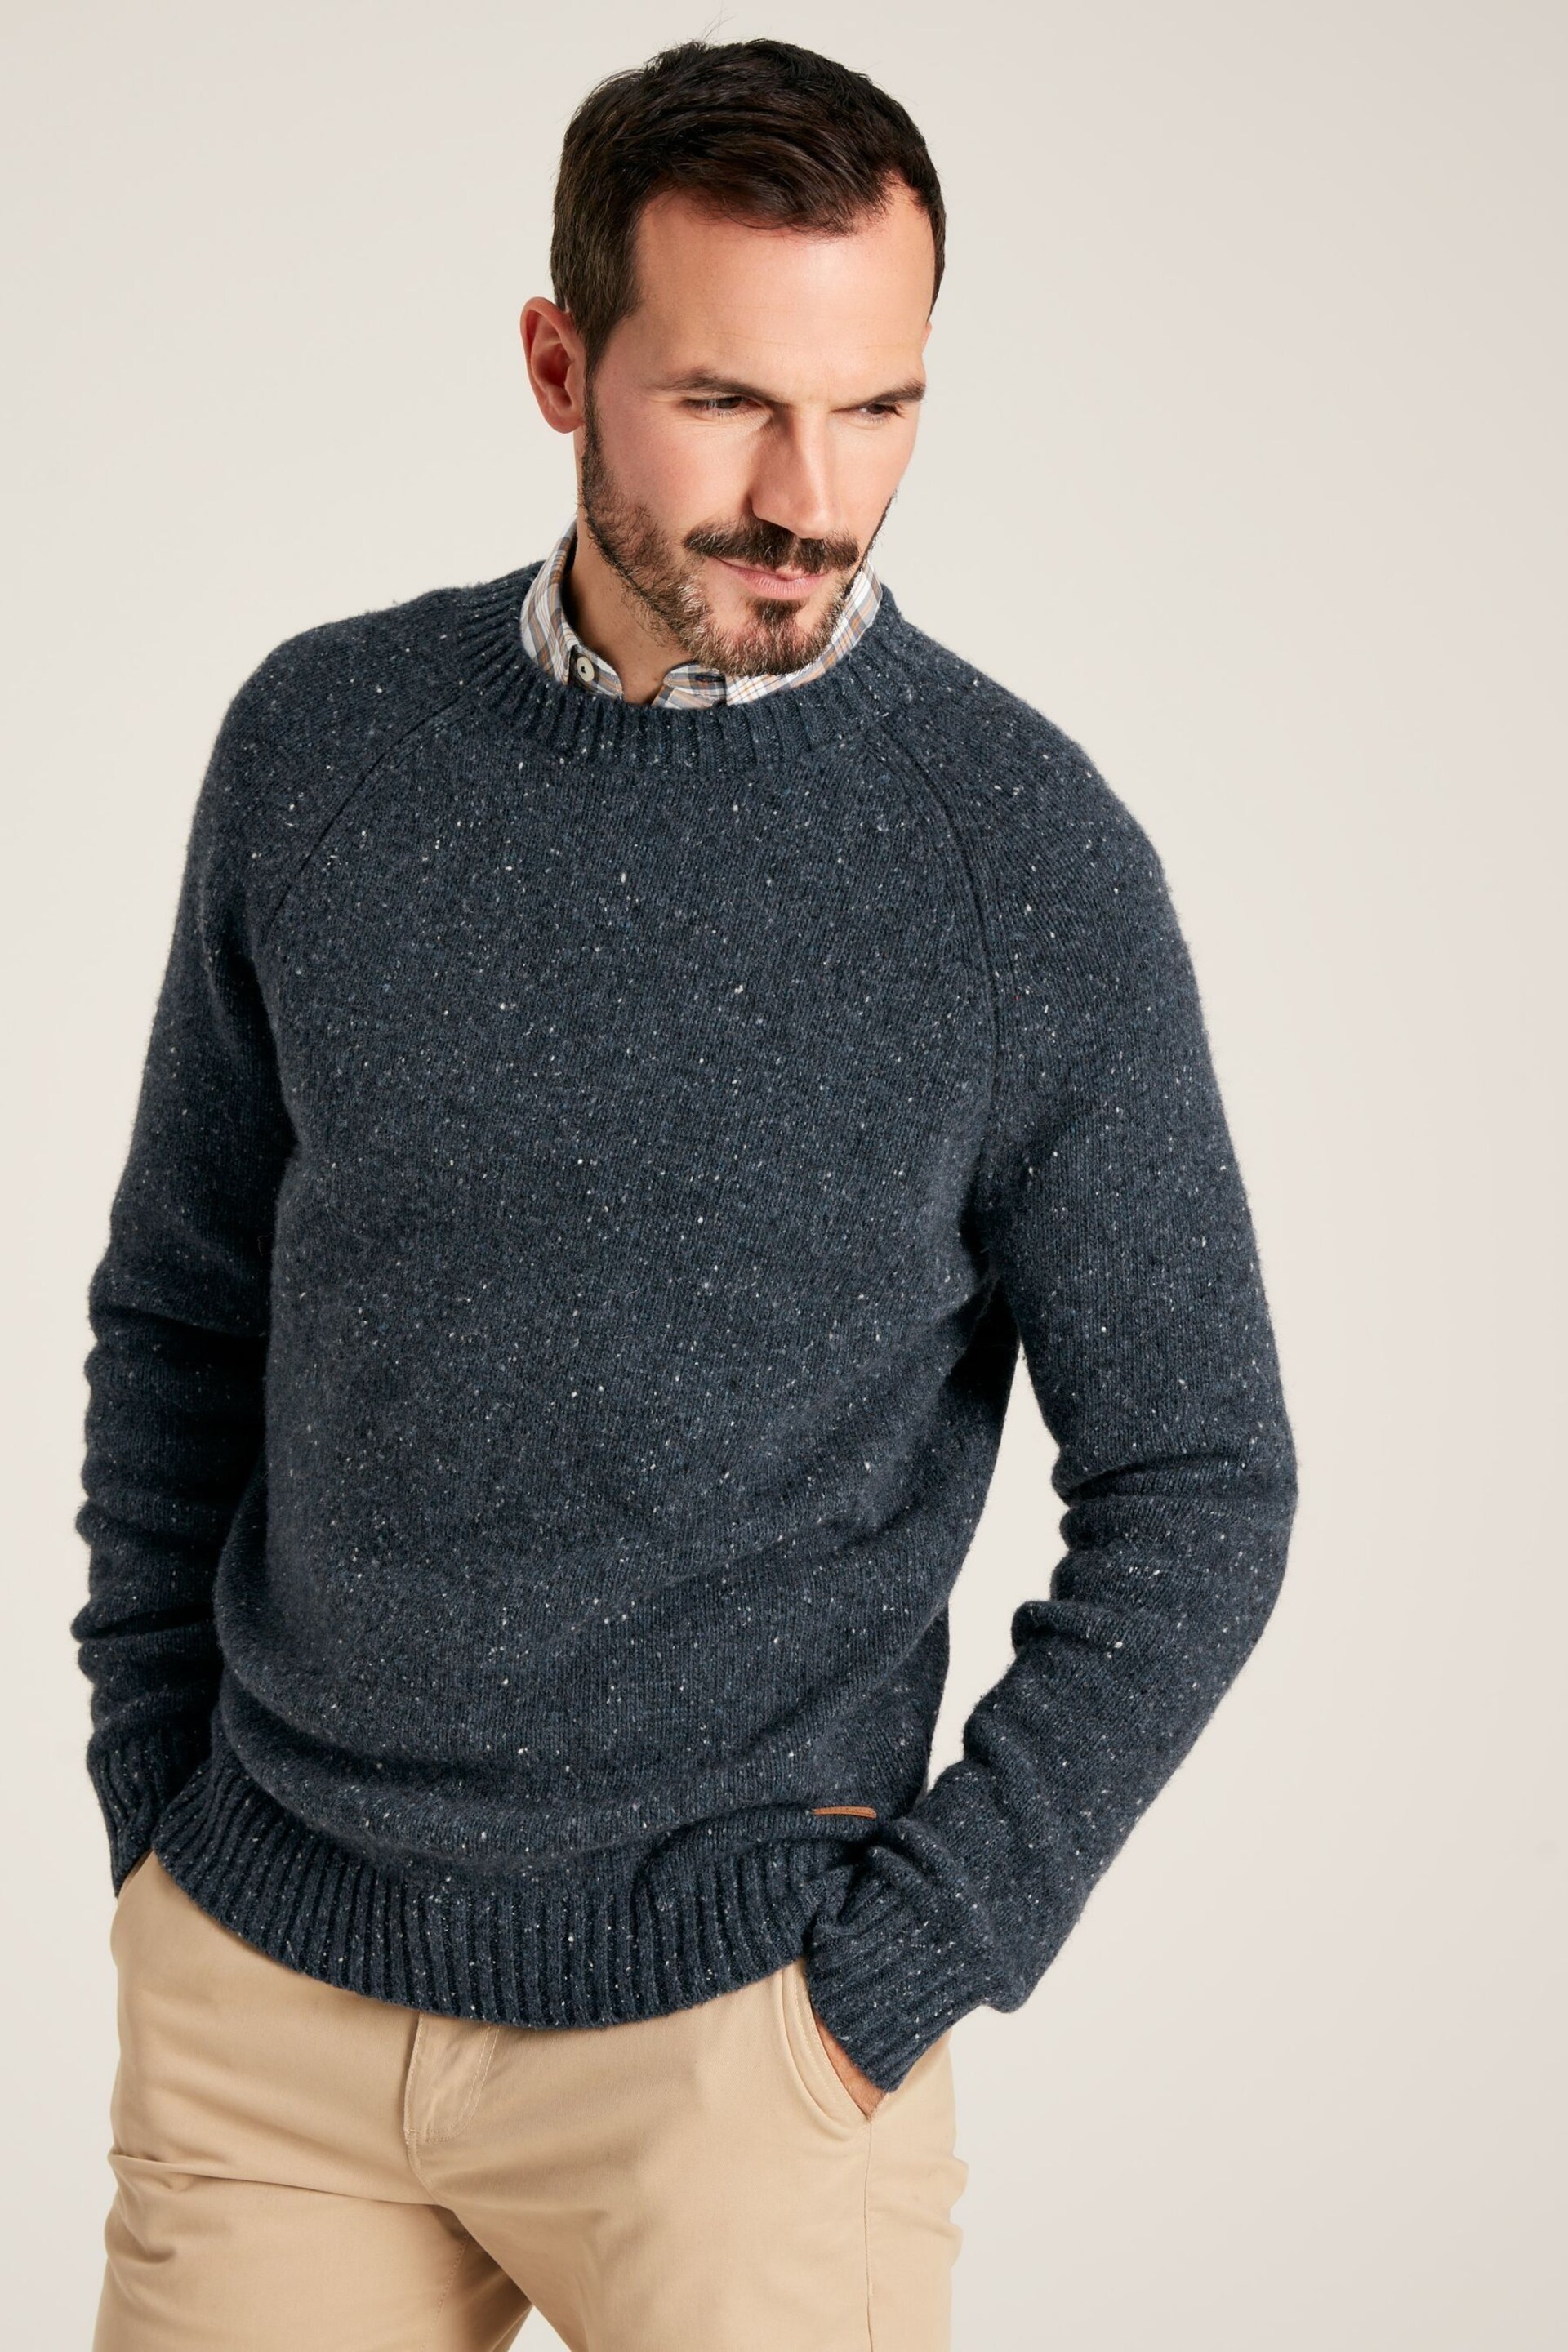 Joules Glenbay Blue Crew Neck Knitted Jumper - Image 3 of 7